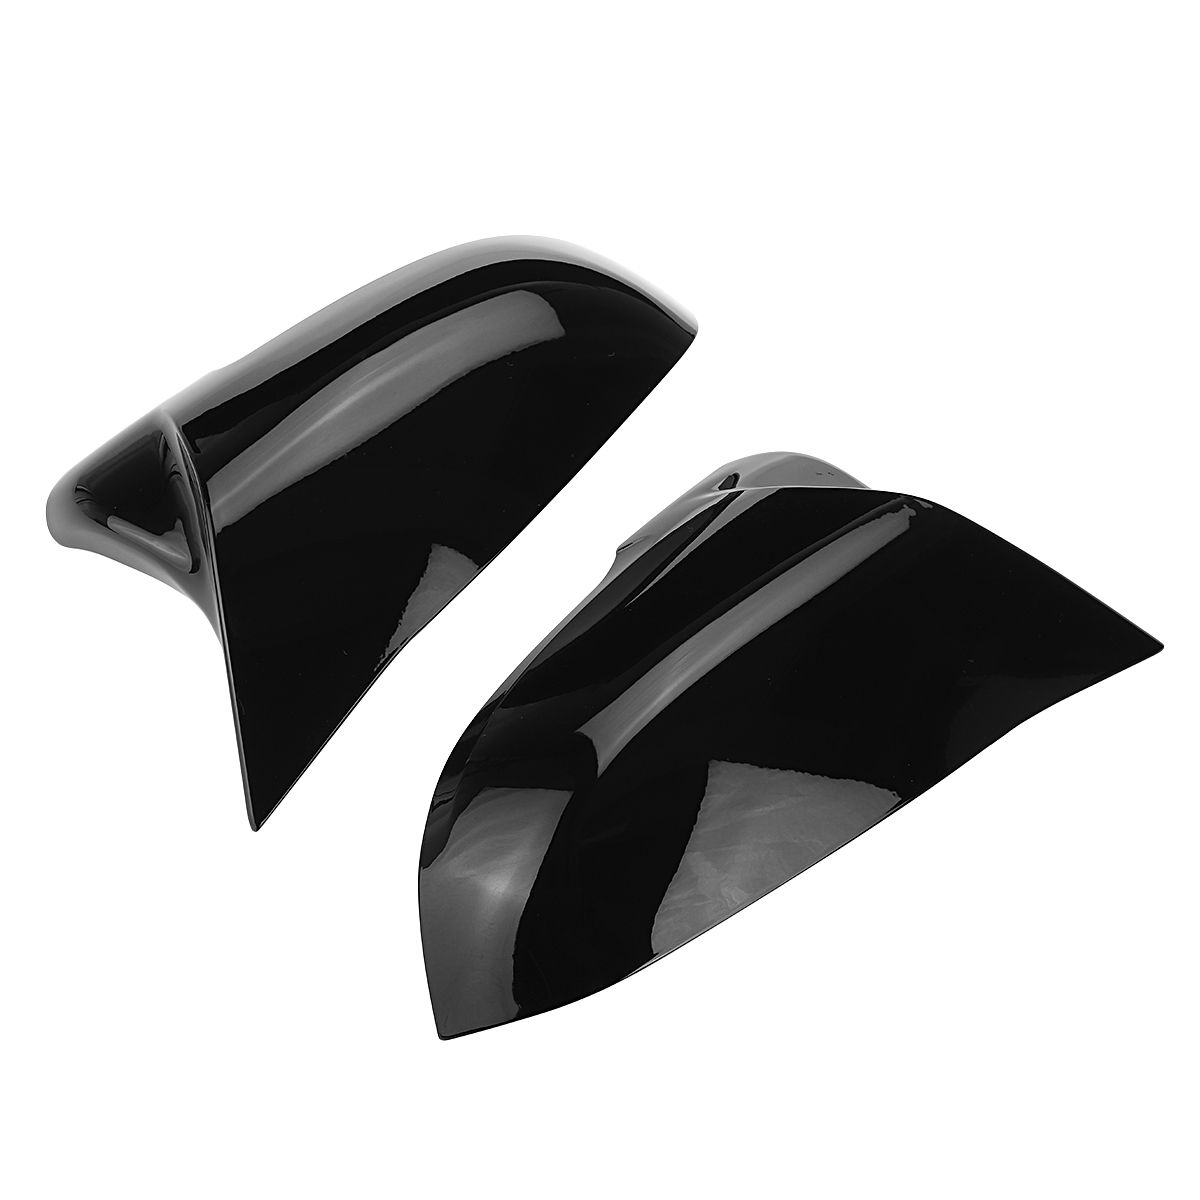 2PCS-M-Style-Gloss-Black-Mirror-Cover-Cap-Direct-Replacement-For-Toyota-Supra-2018-2020-1754879